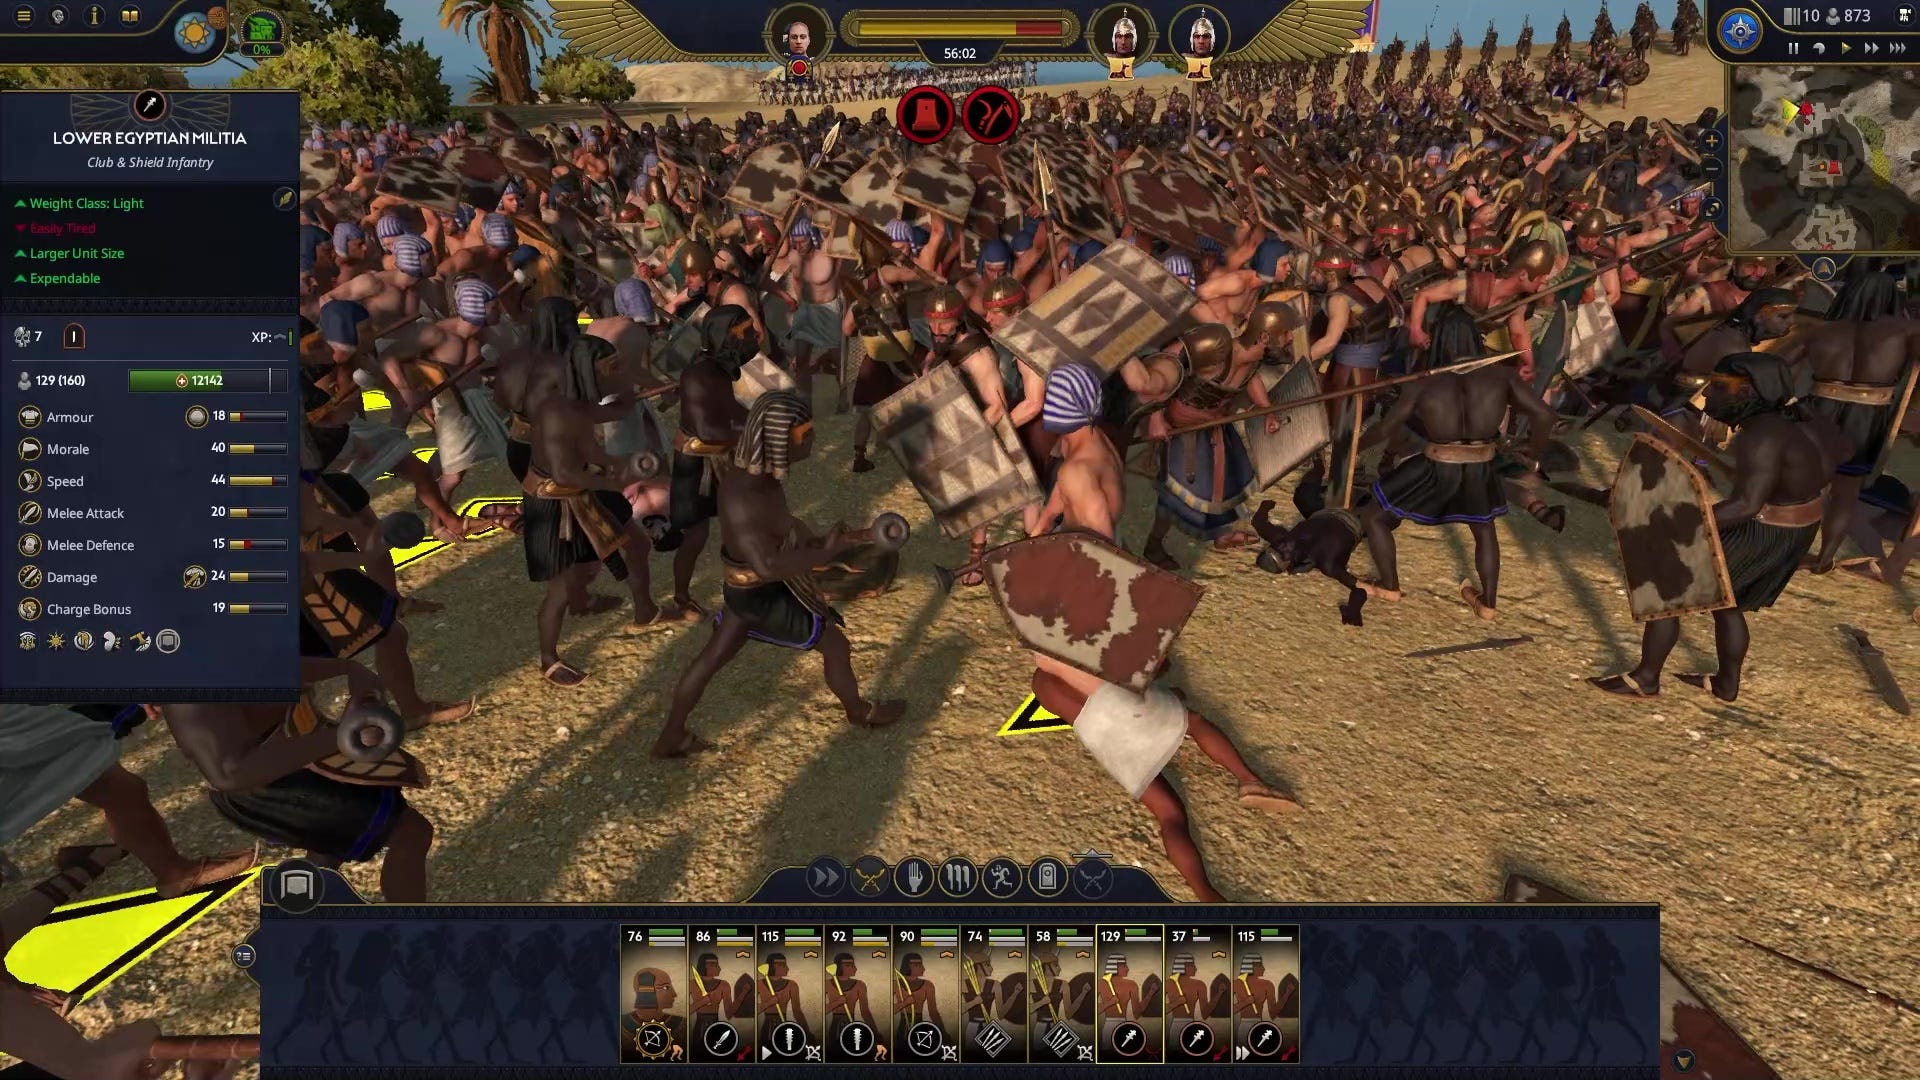 total-war:-pharaoh-has-a-release-date,-and-a-sweeping-campaign-map-flyover-video